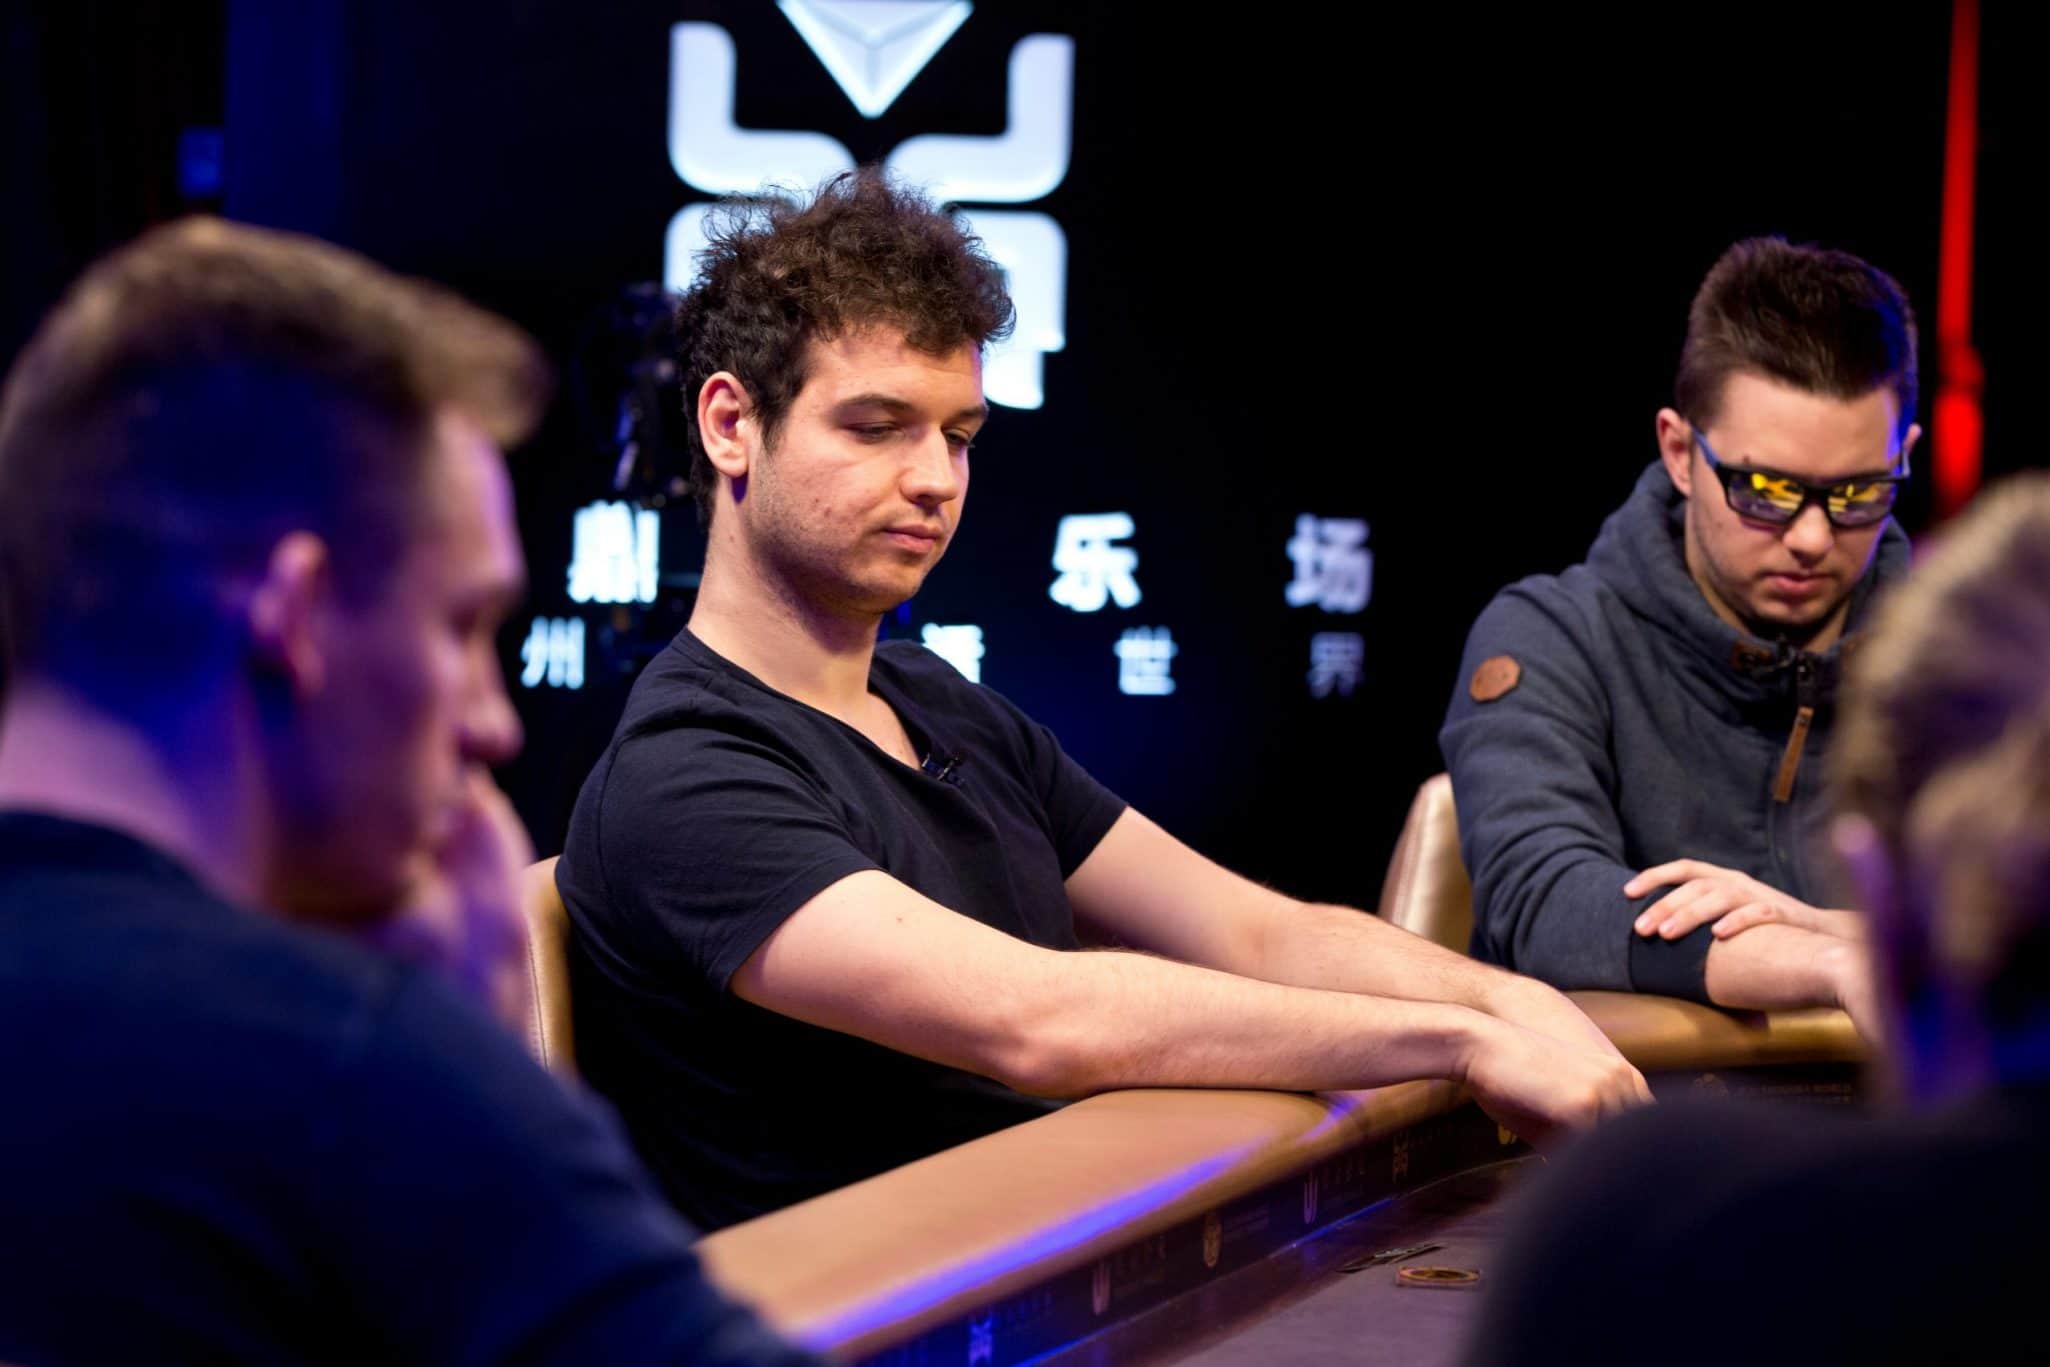 Michael Addamo Wins $100k at WPT World Online Championships; Charlie Godwin Turns $109 into $620k Coming Third